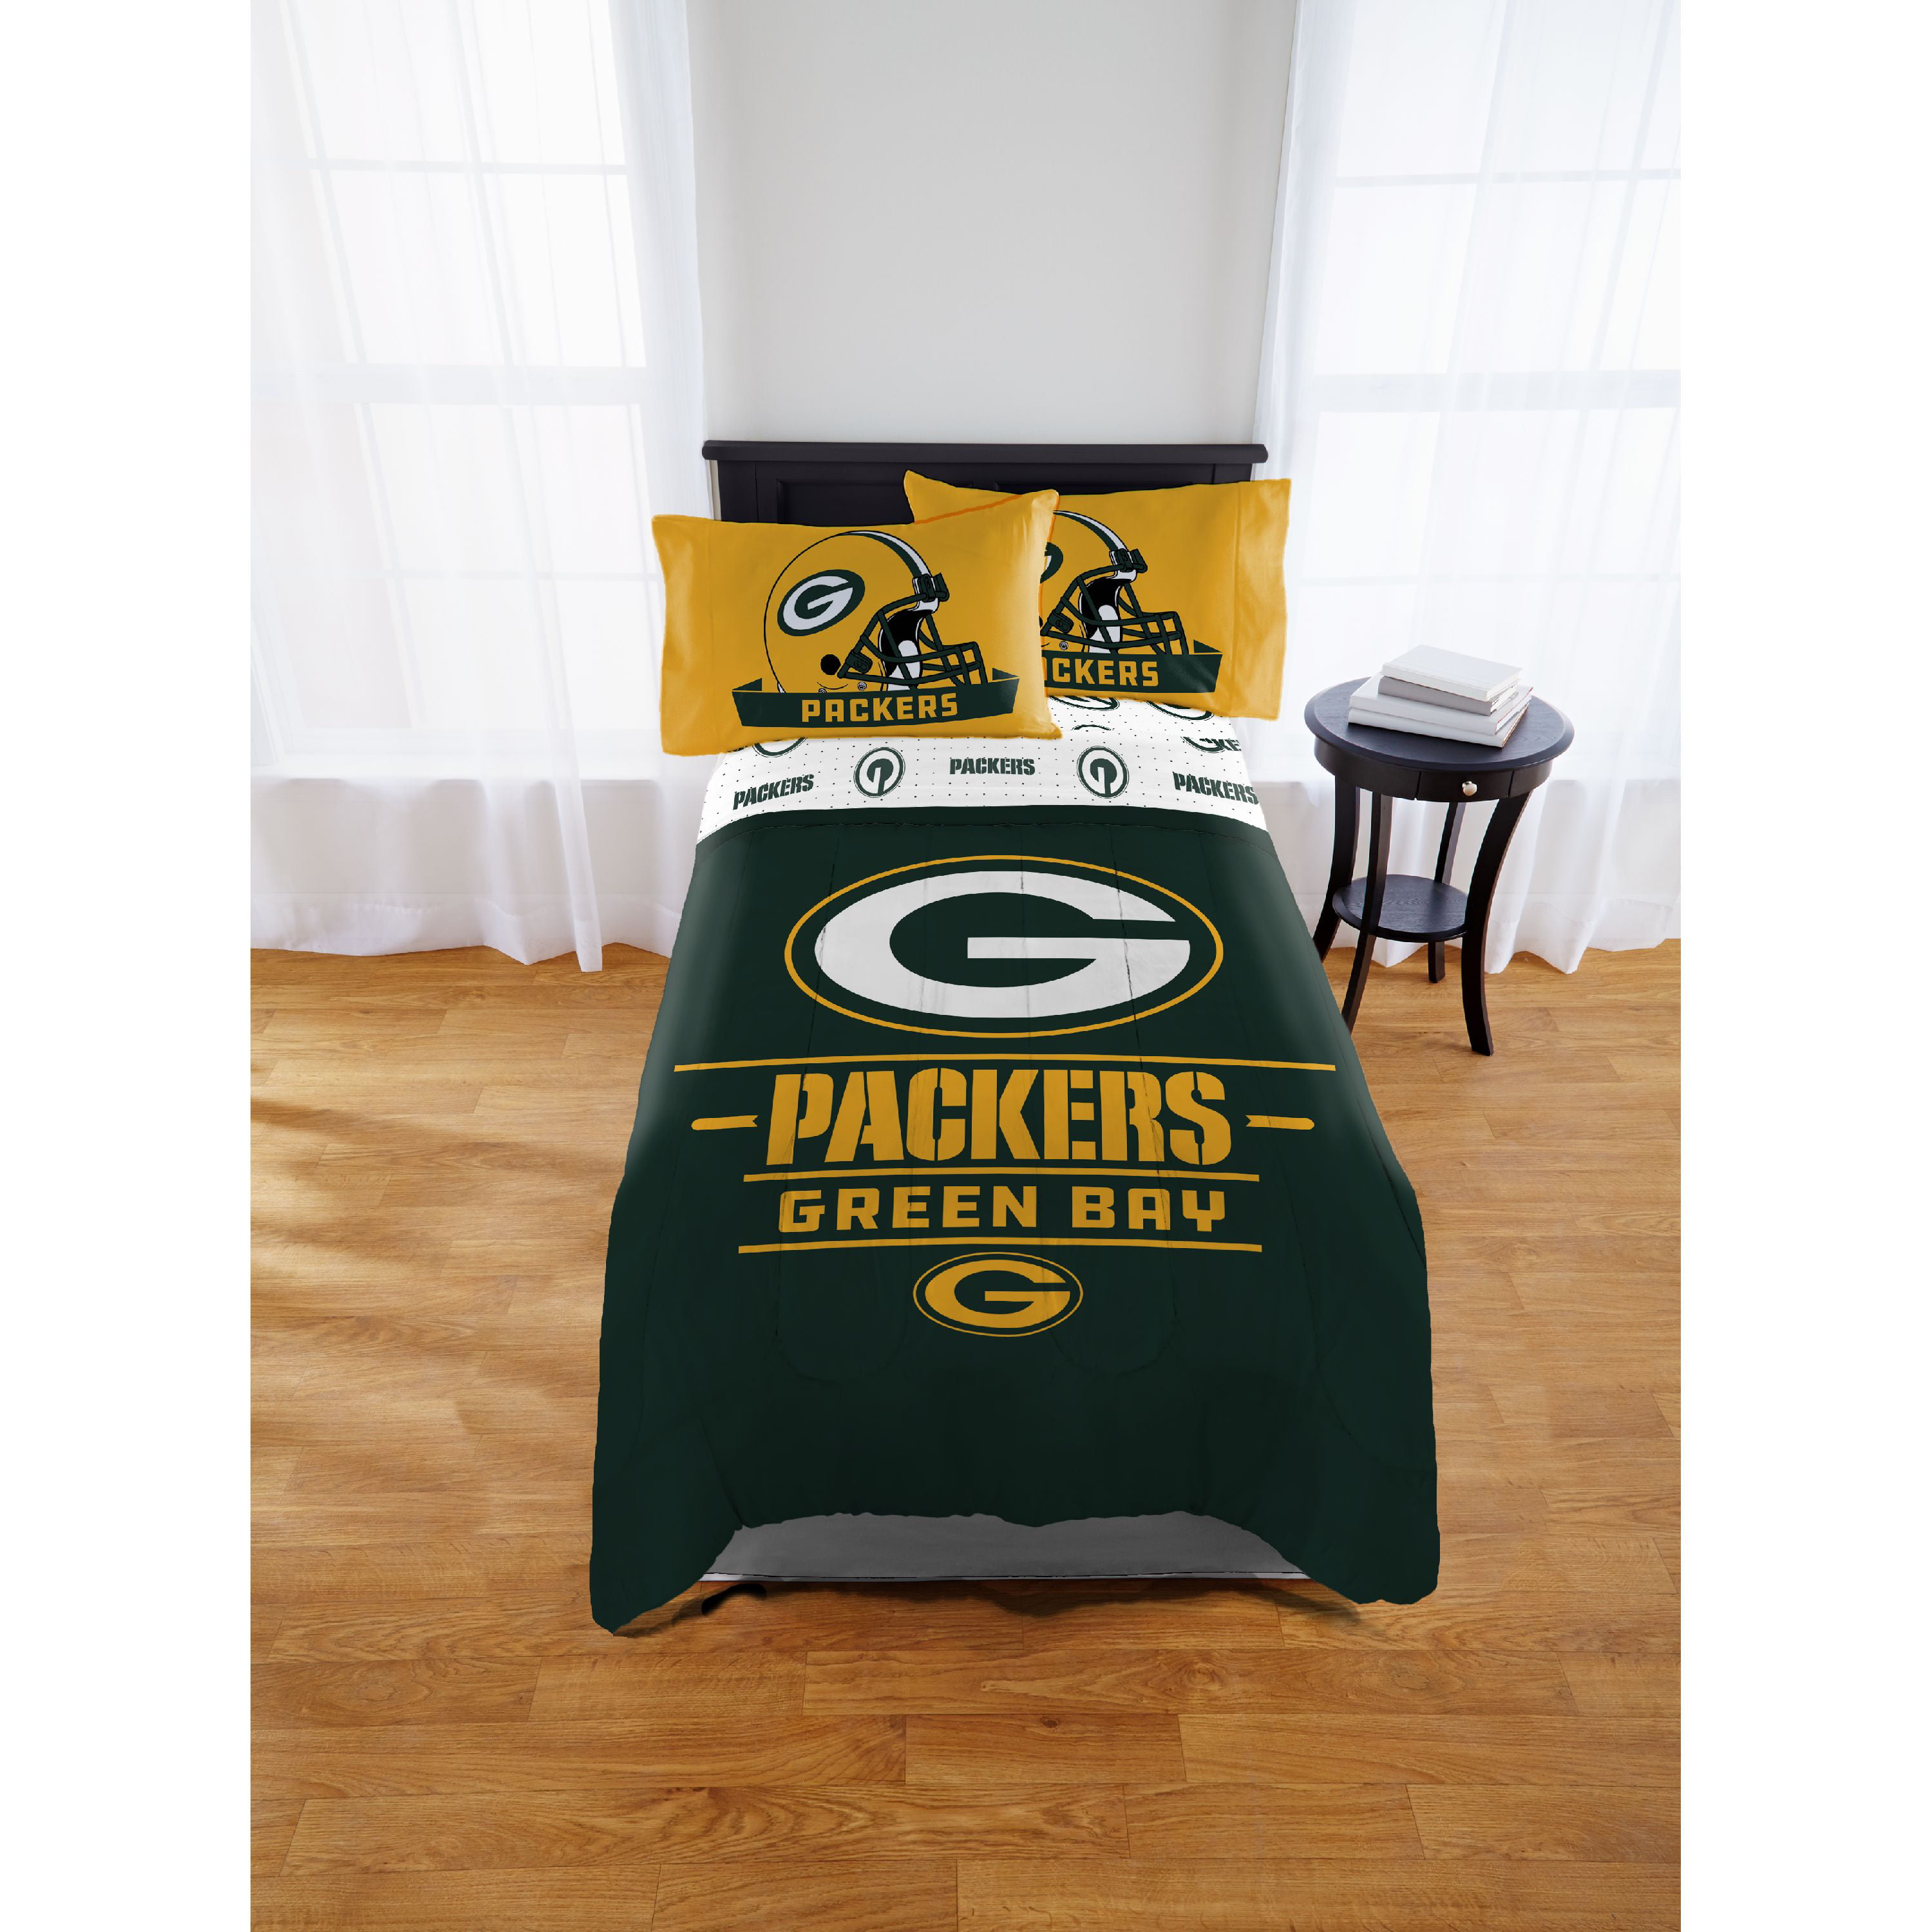 Nfl Green Bay Packers Monument Twin, Green Bay Packers Twin Size Bedding